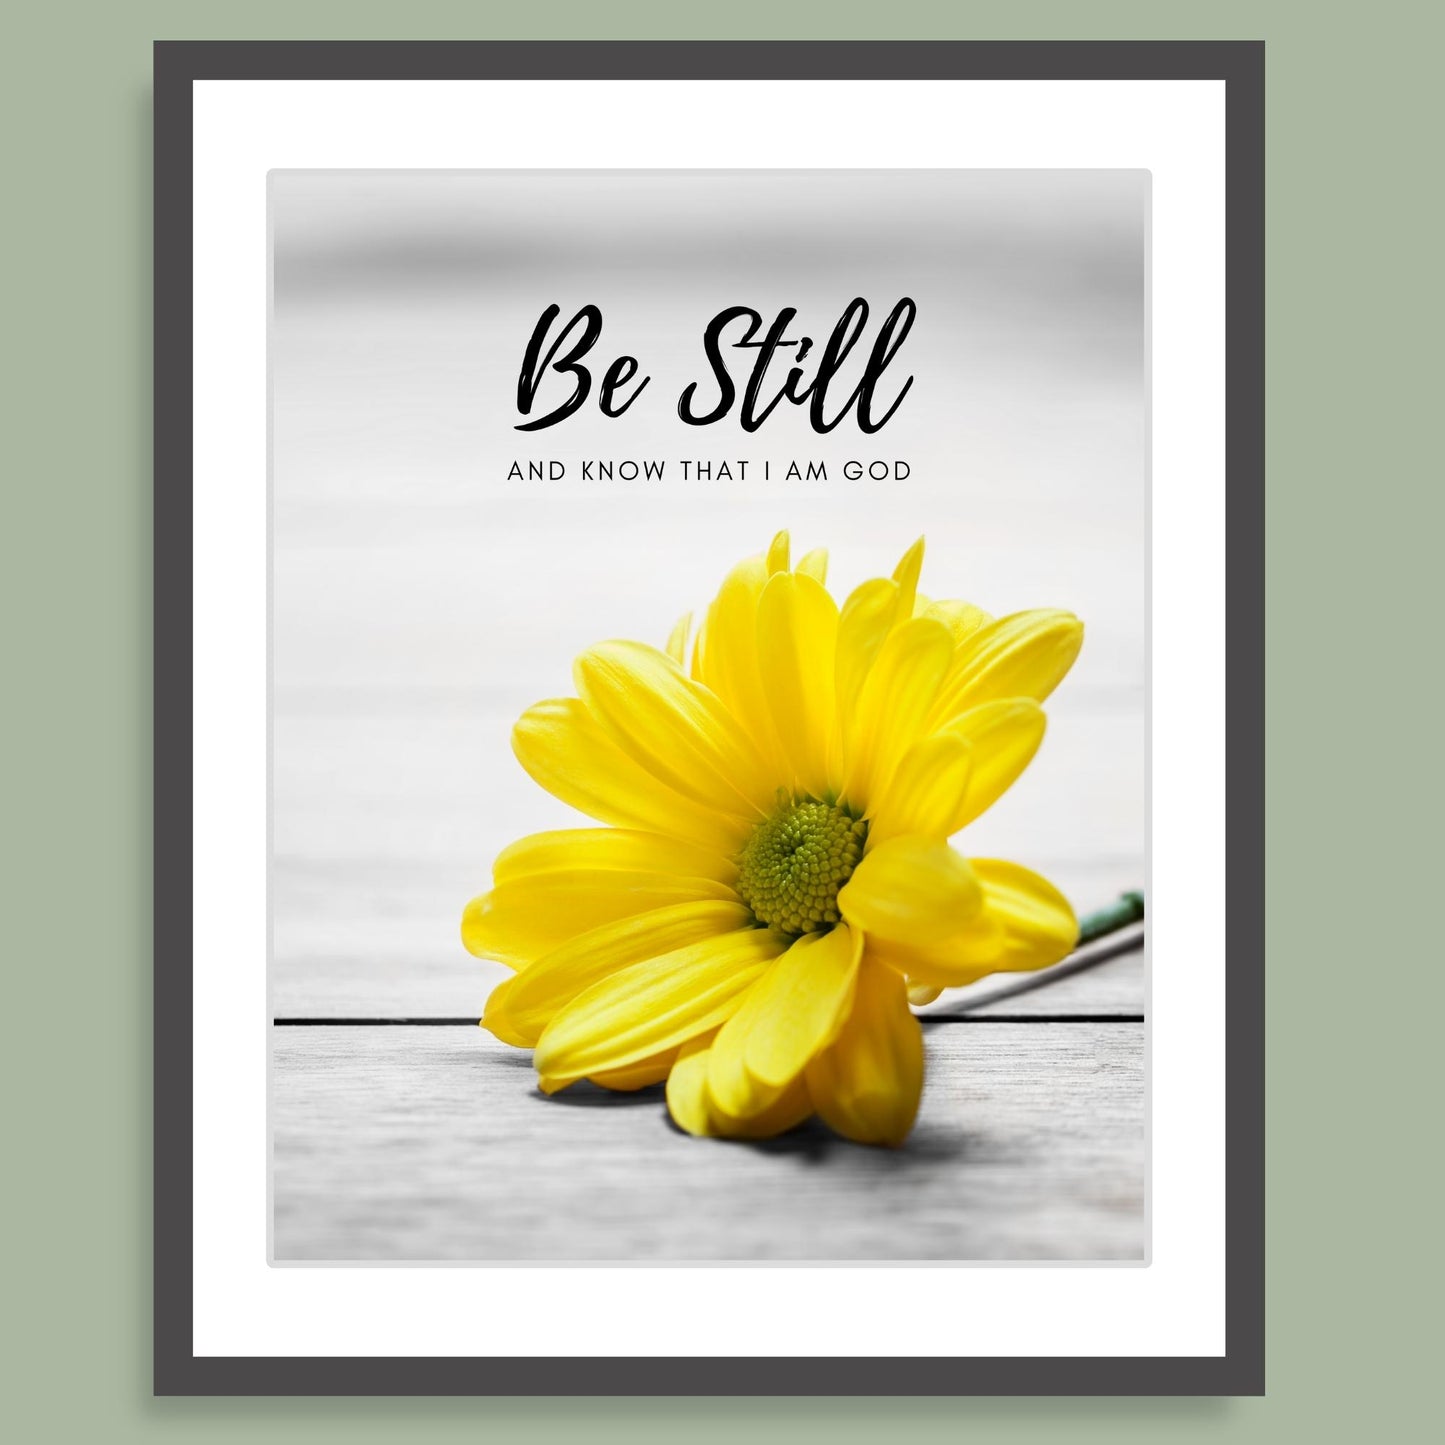 Inspirational Word Art - Be Still and know that I am God - Yellow Daisy Wall Decor (8x10 print) | bible verse Psalm 46:10 wall decor in grey frame on pistachio green wall | oak7west.com